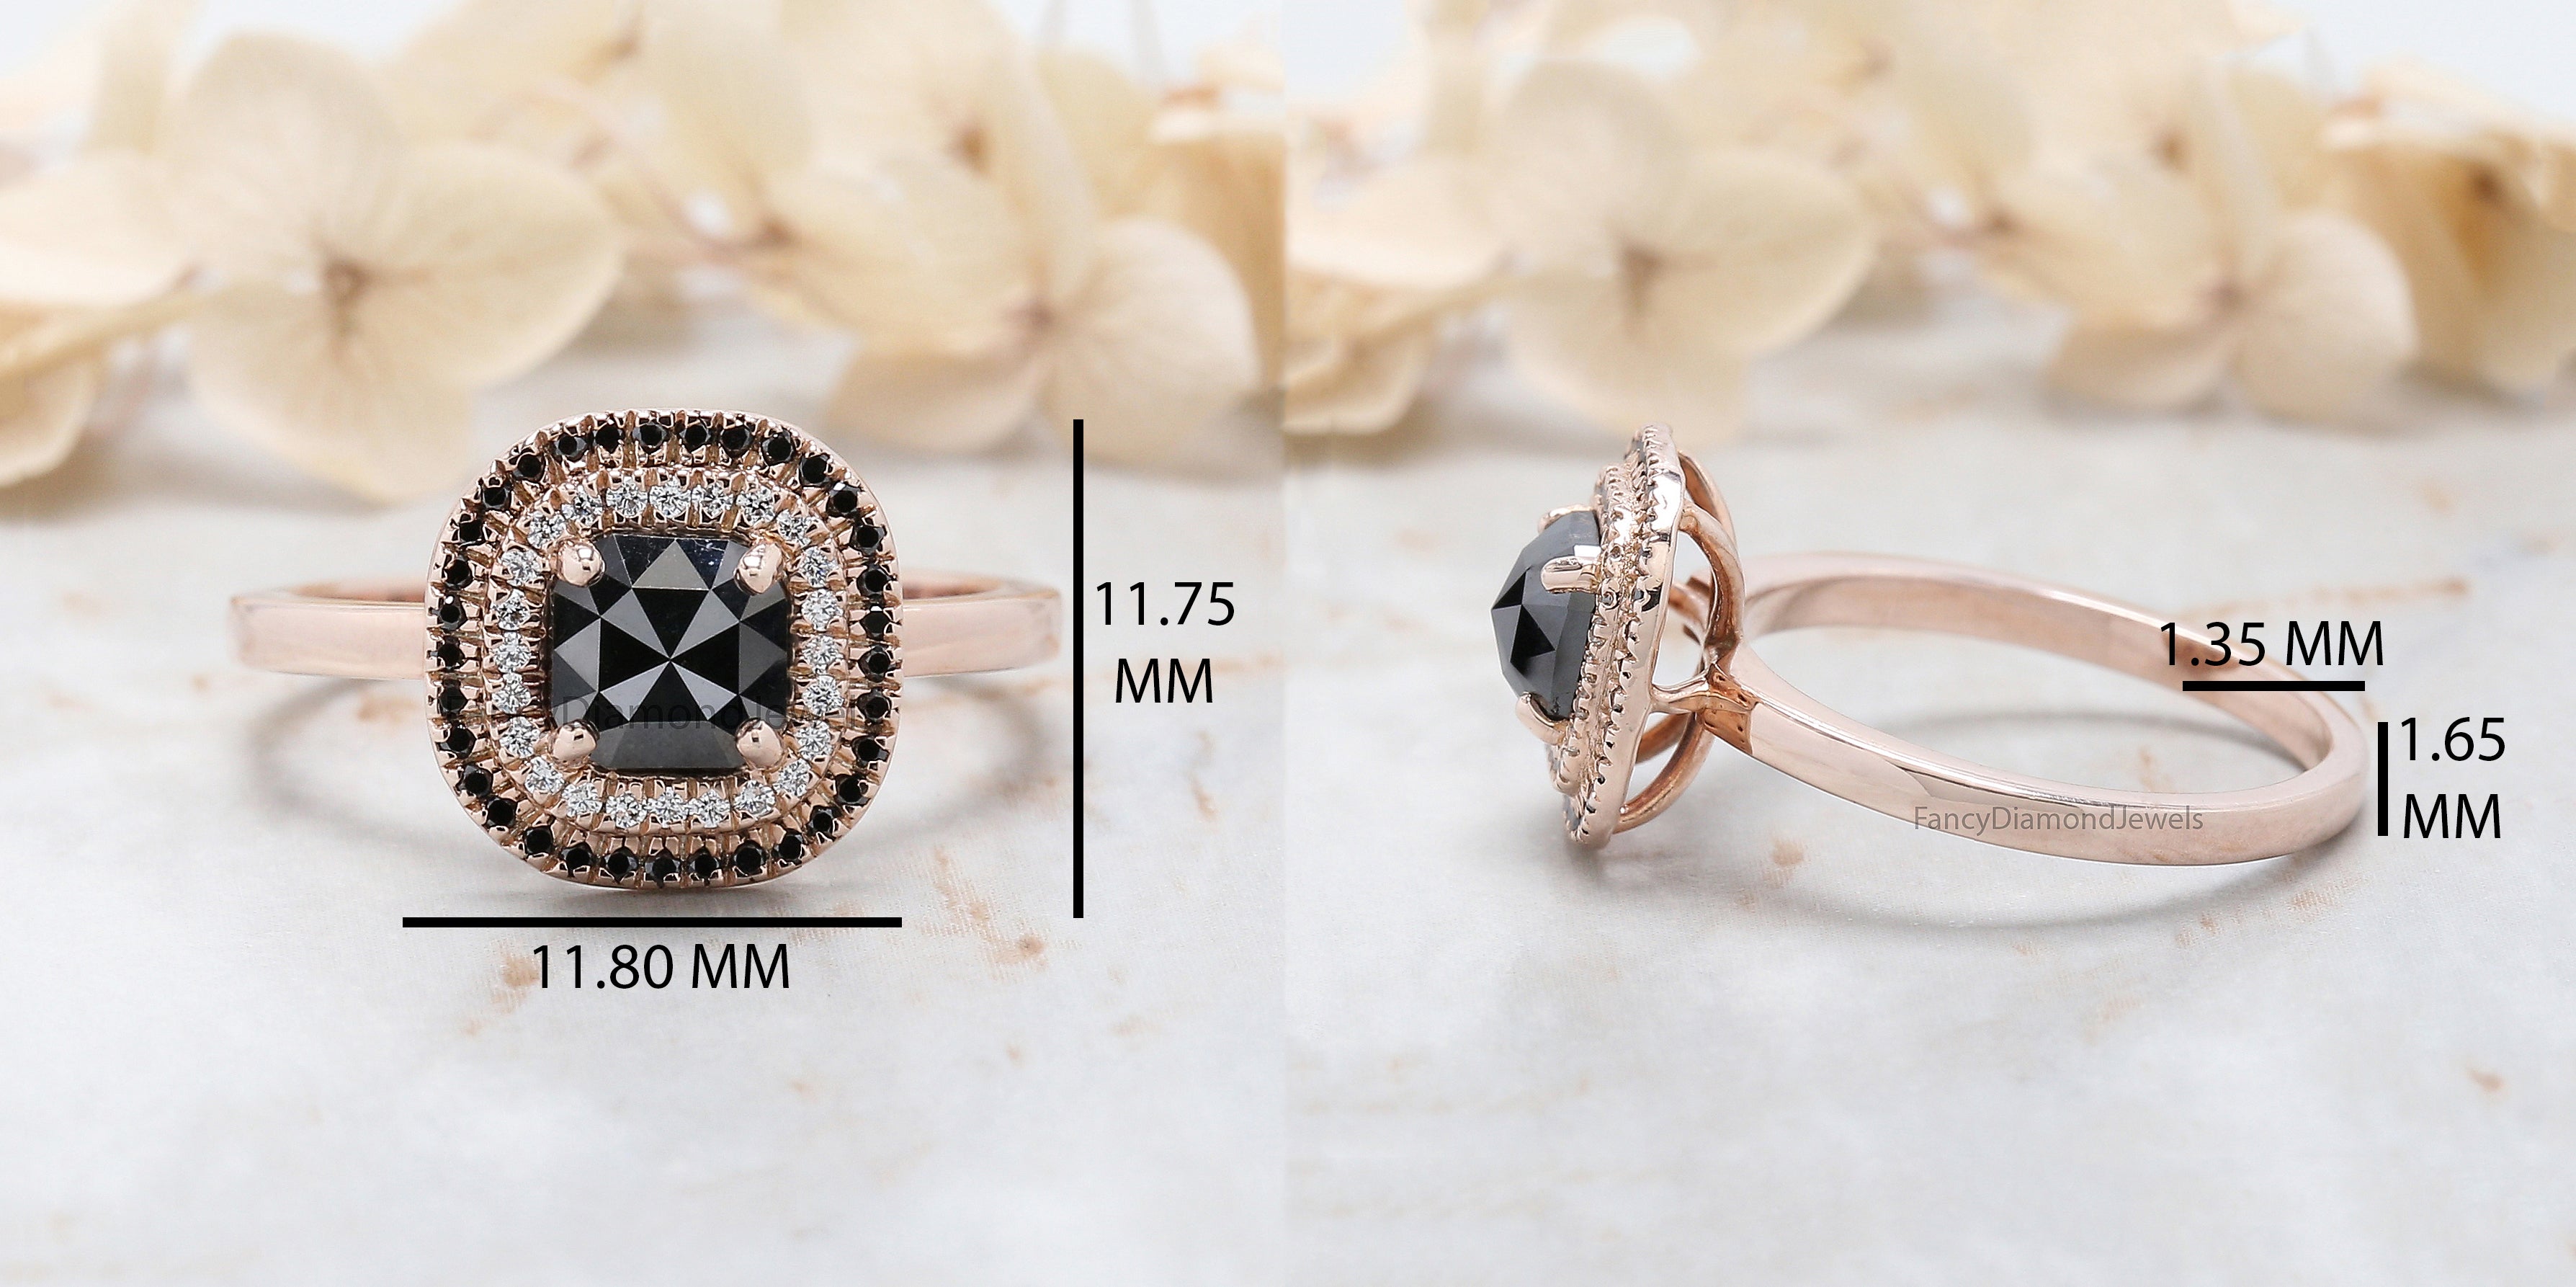 Cushion Shape Black Color Diamond Ring 1.02 Ct 5.80 MM Cushion Diamond Ring 14K Solid Rose Gold Silver Engagement Ring Gift For Her QN2518